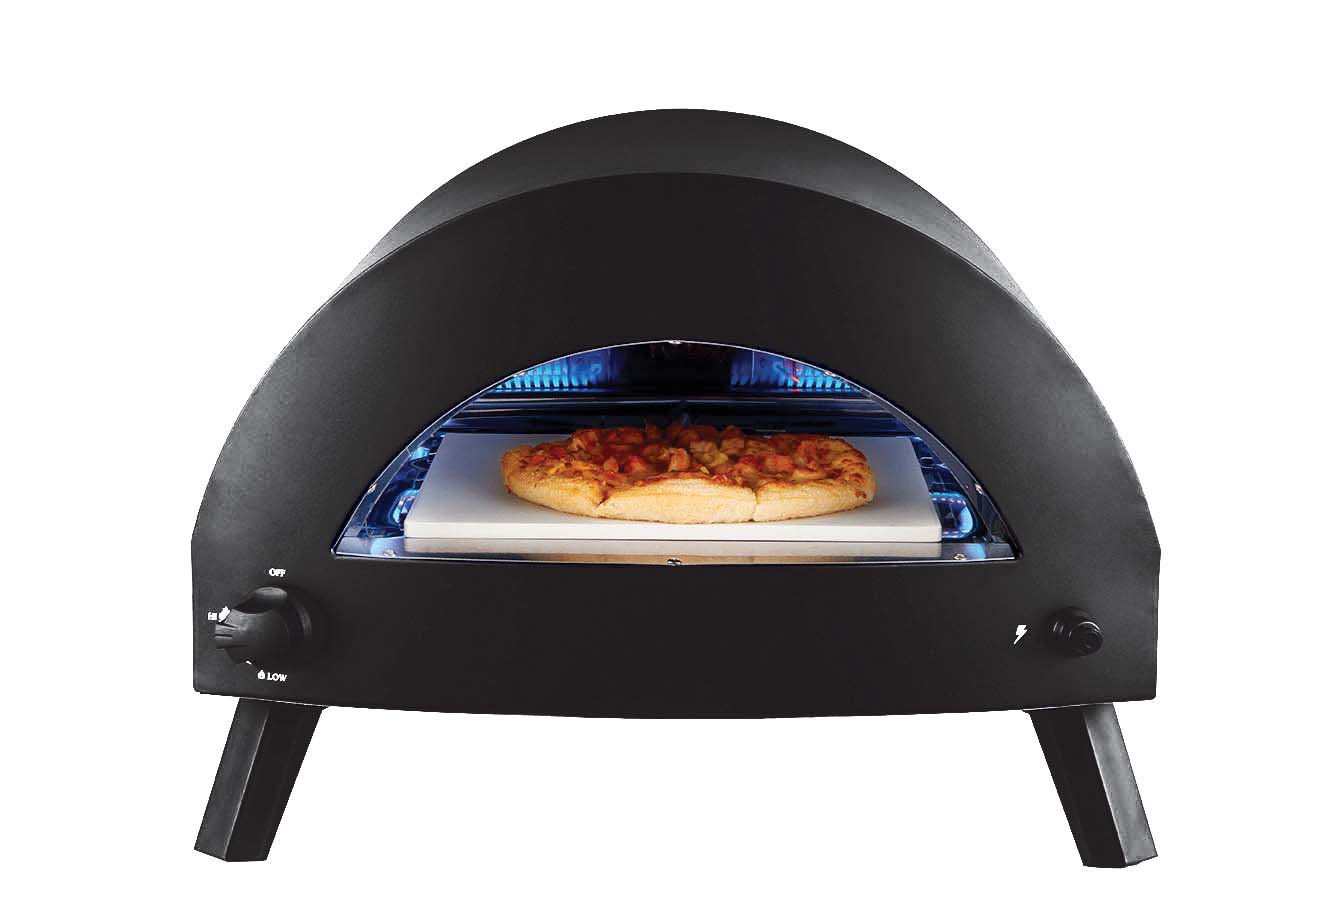 Omica Pizza Oven with pizza cooking